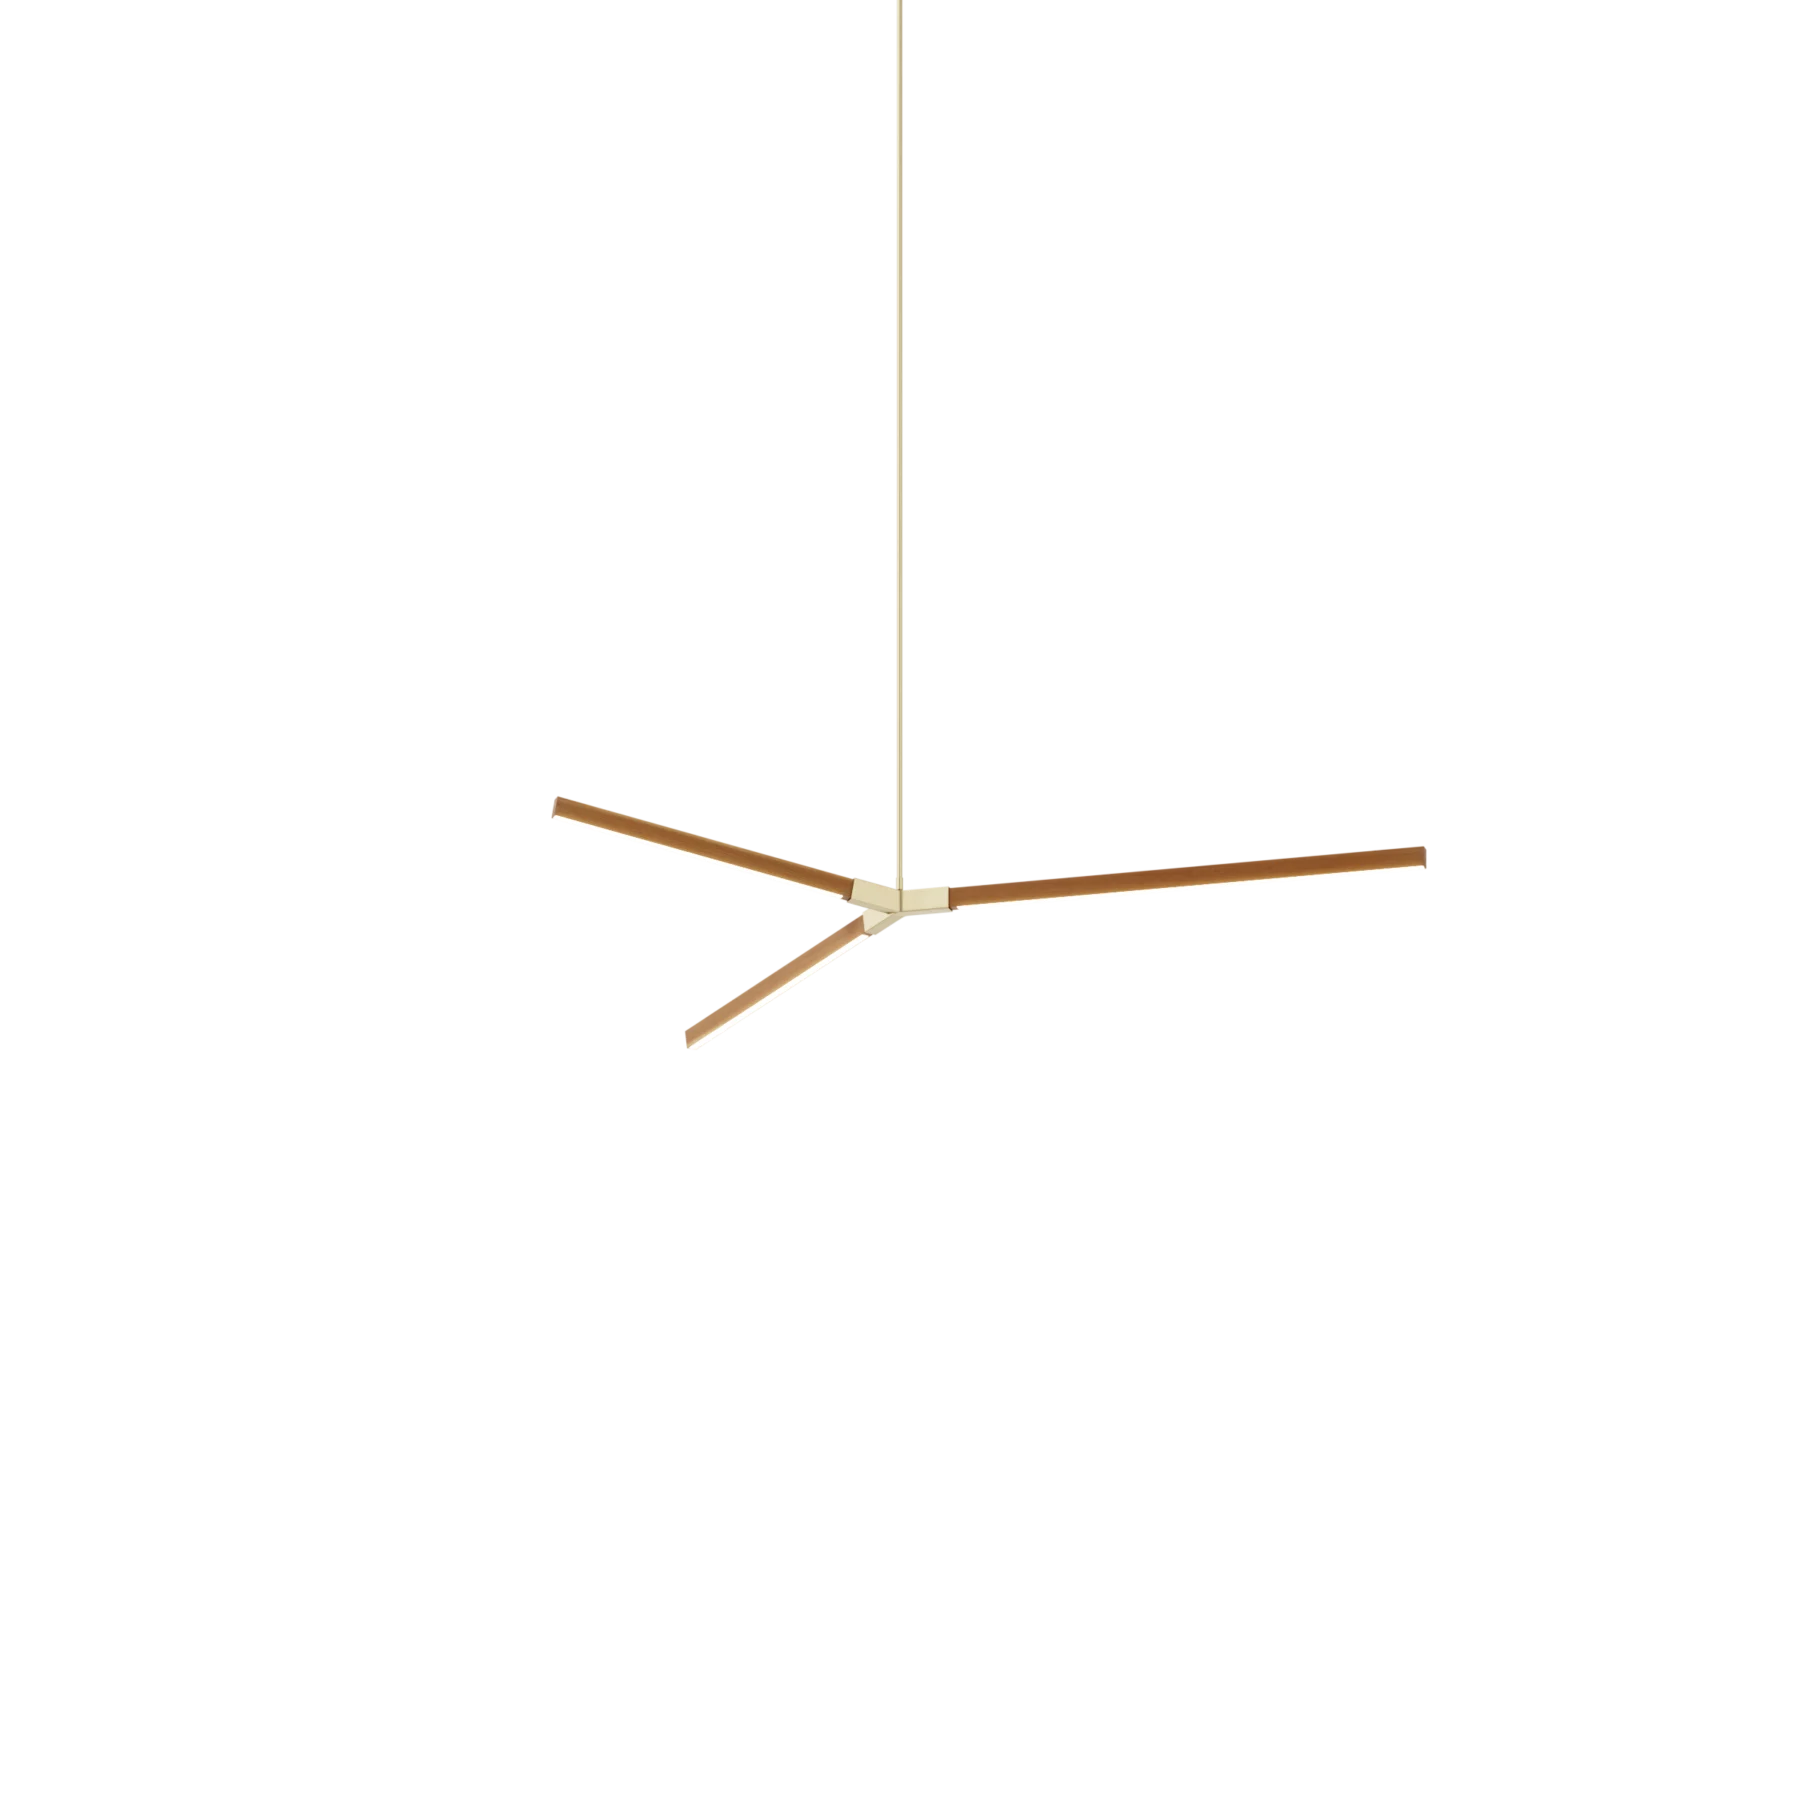 Image of a Stickbulb Bough lighting fixture. The modern fixture consists of sleek wooden beams with multiple integrated LED bulbs. The bulbs emit warm, diffused light, casting a gentle glow in the surrounding space. The wooden beam is suspended from thin cables, giving it a floating appearance.